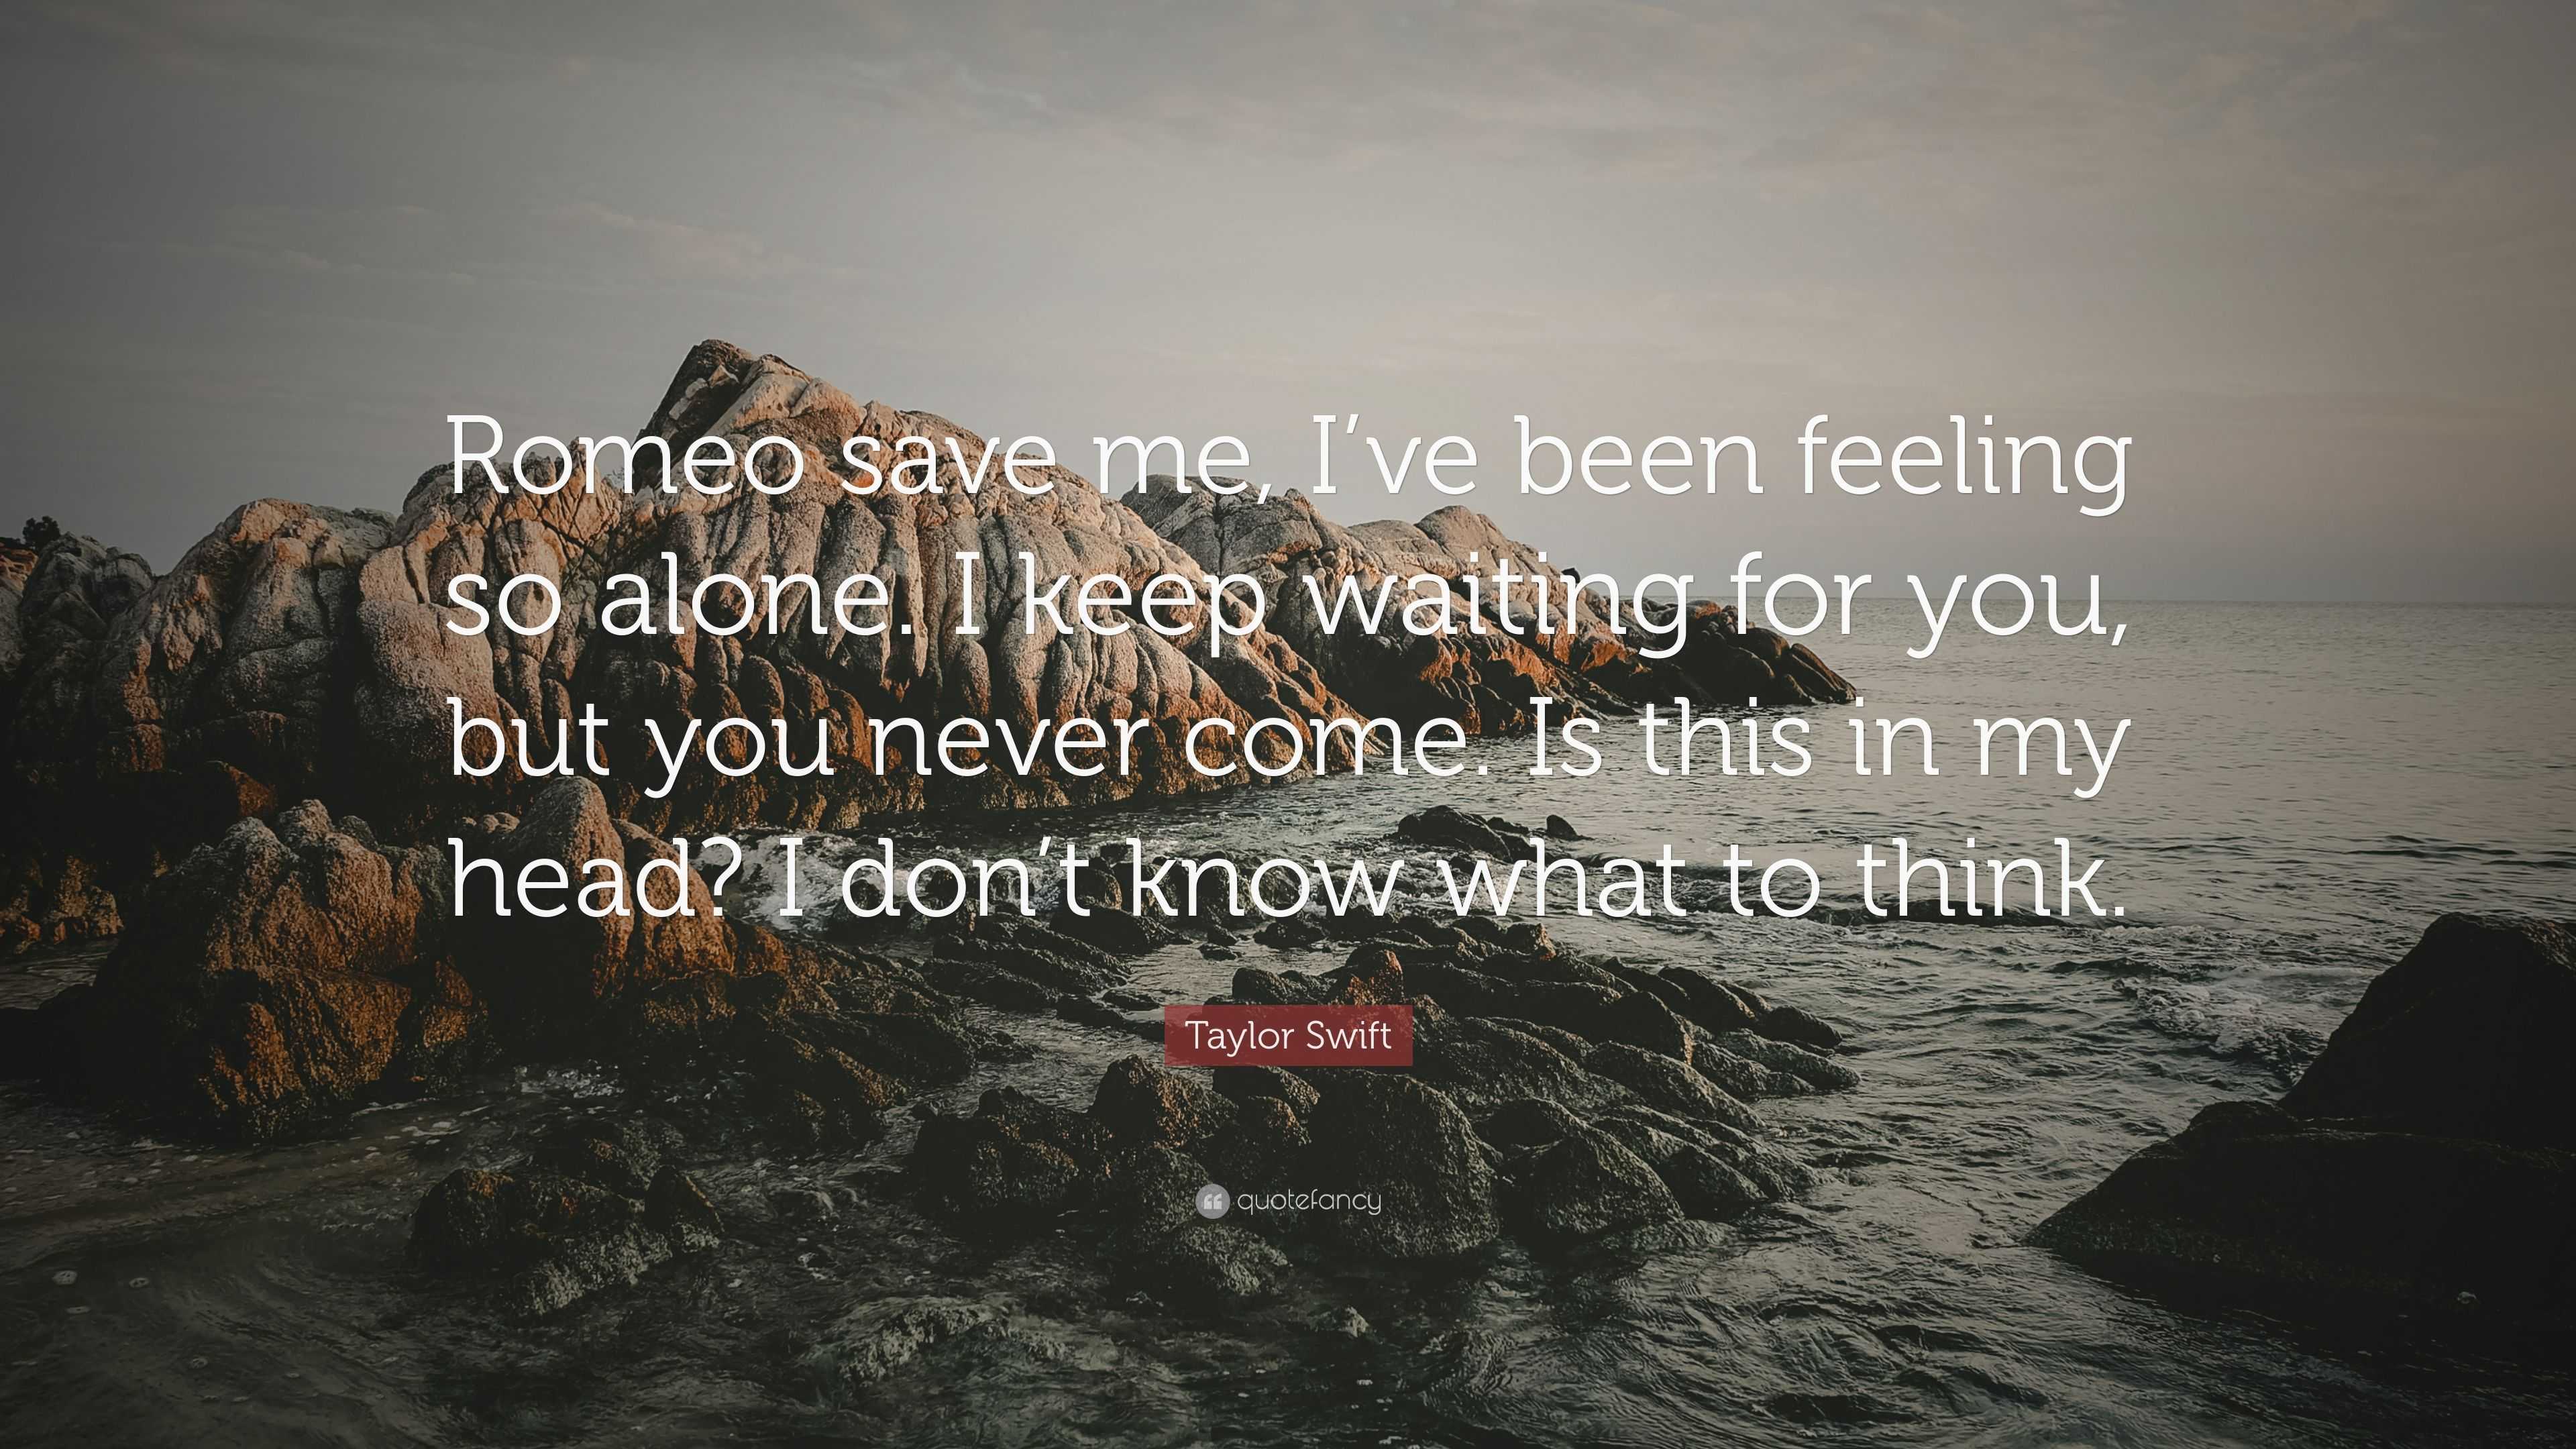 Taylor Swift Quote: “Romeo save me, I’ve been feeling so alone. I keep ...